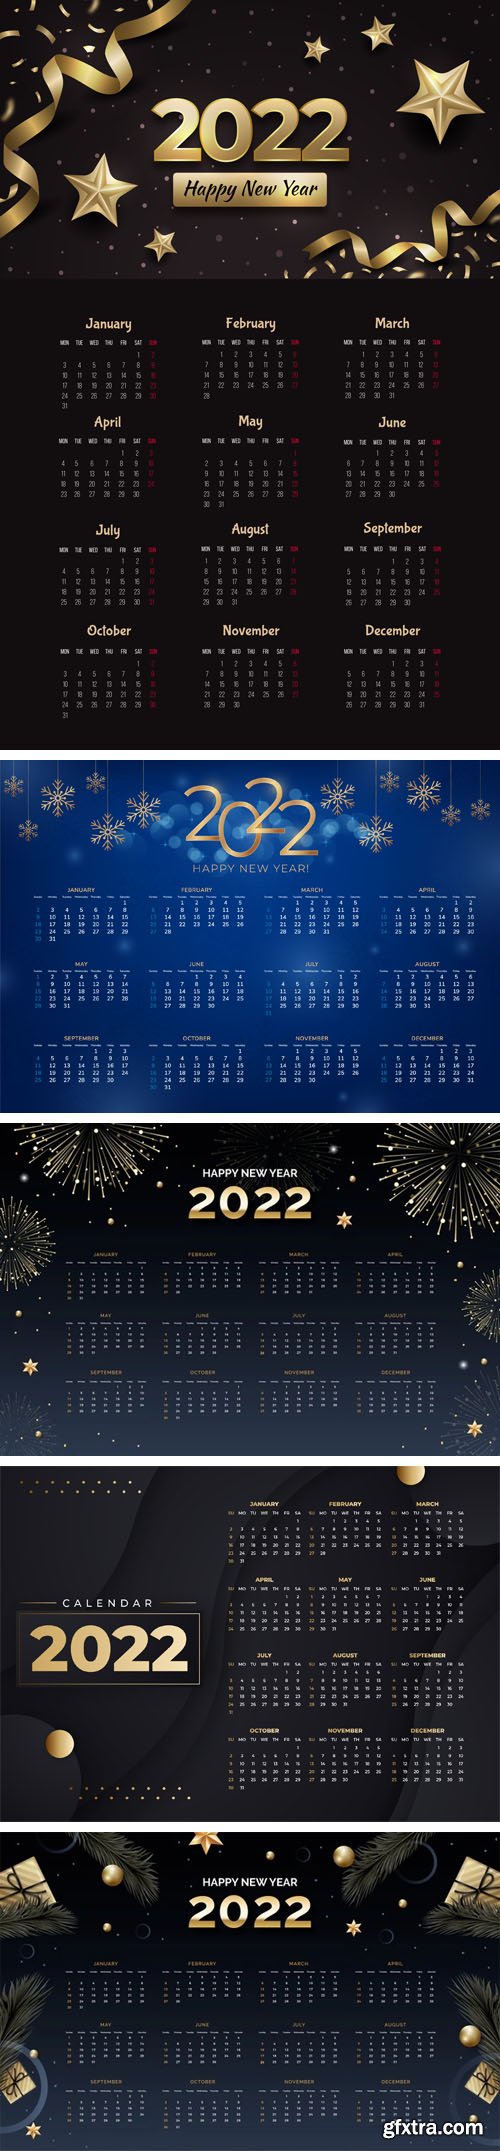 5 Modern Calendars for New Year 2022 Vector Templates